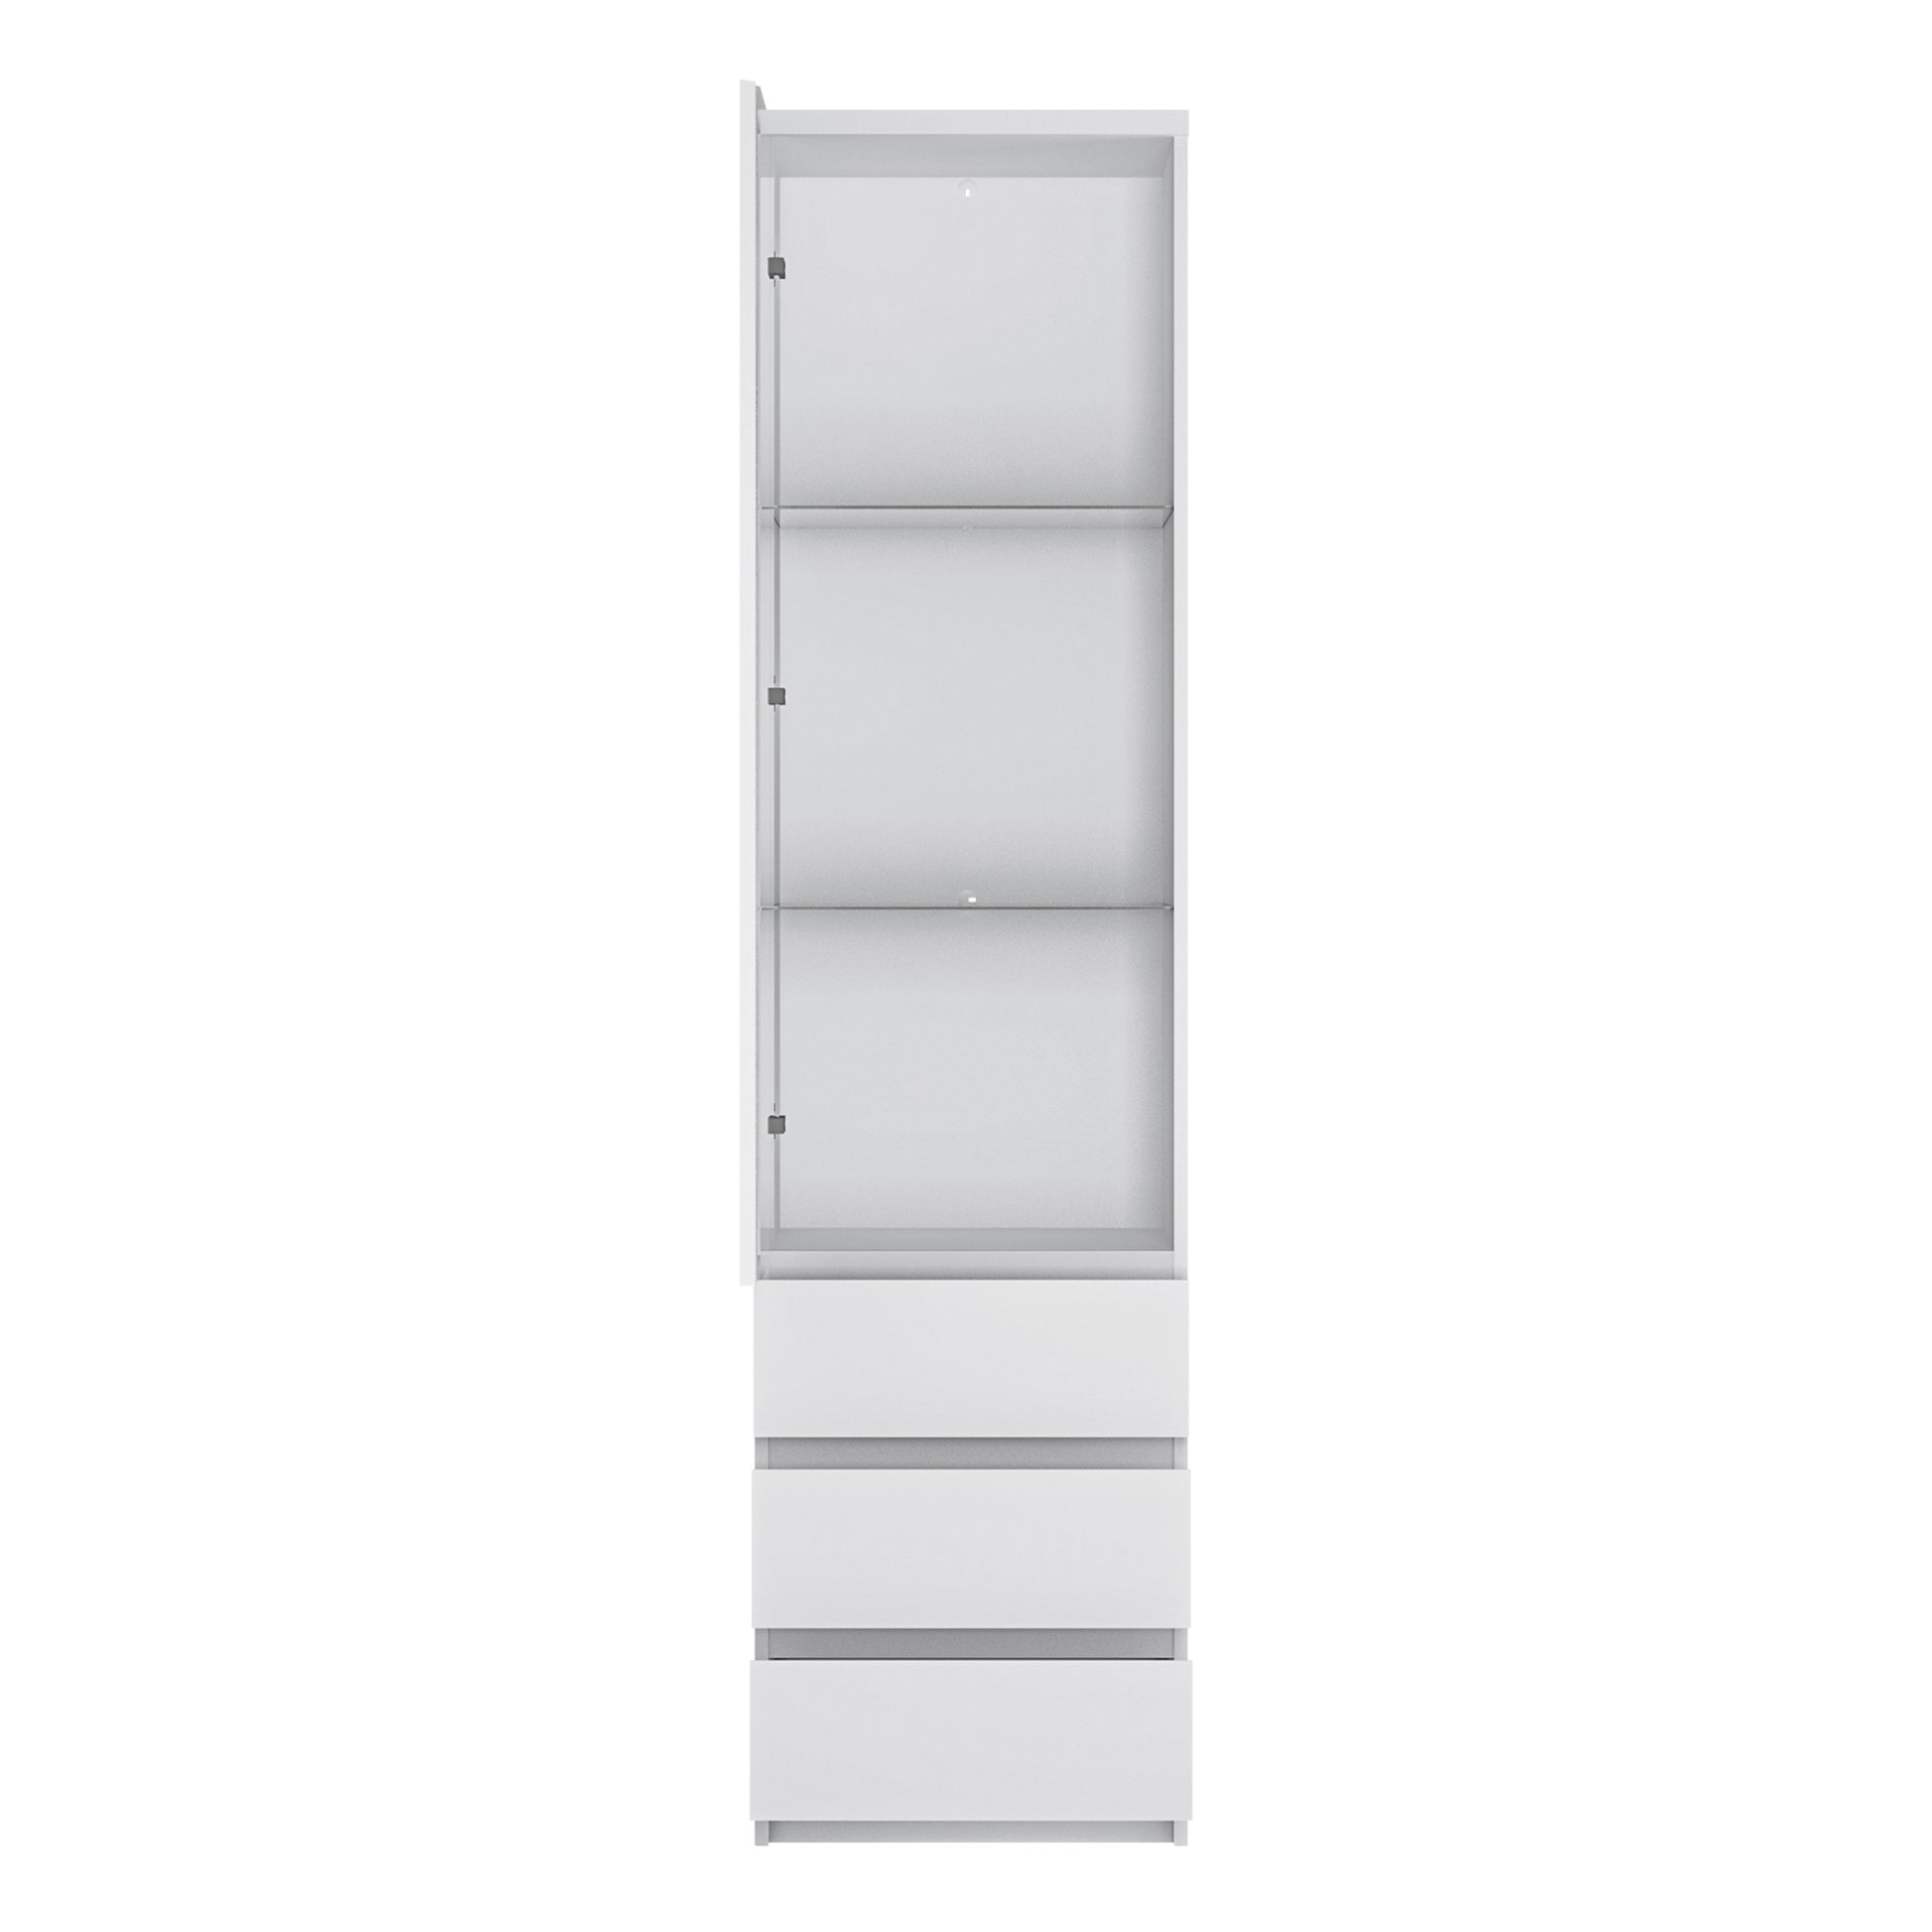 Fribo White Fribo Tall narrow 1 door 3 drawer glazed display cabinet in White